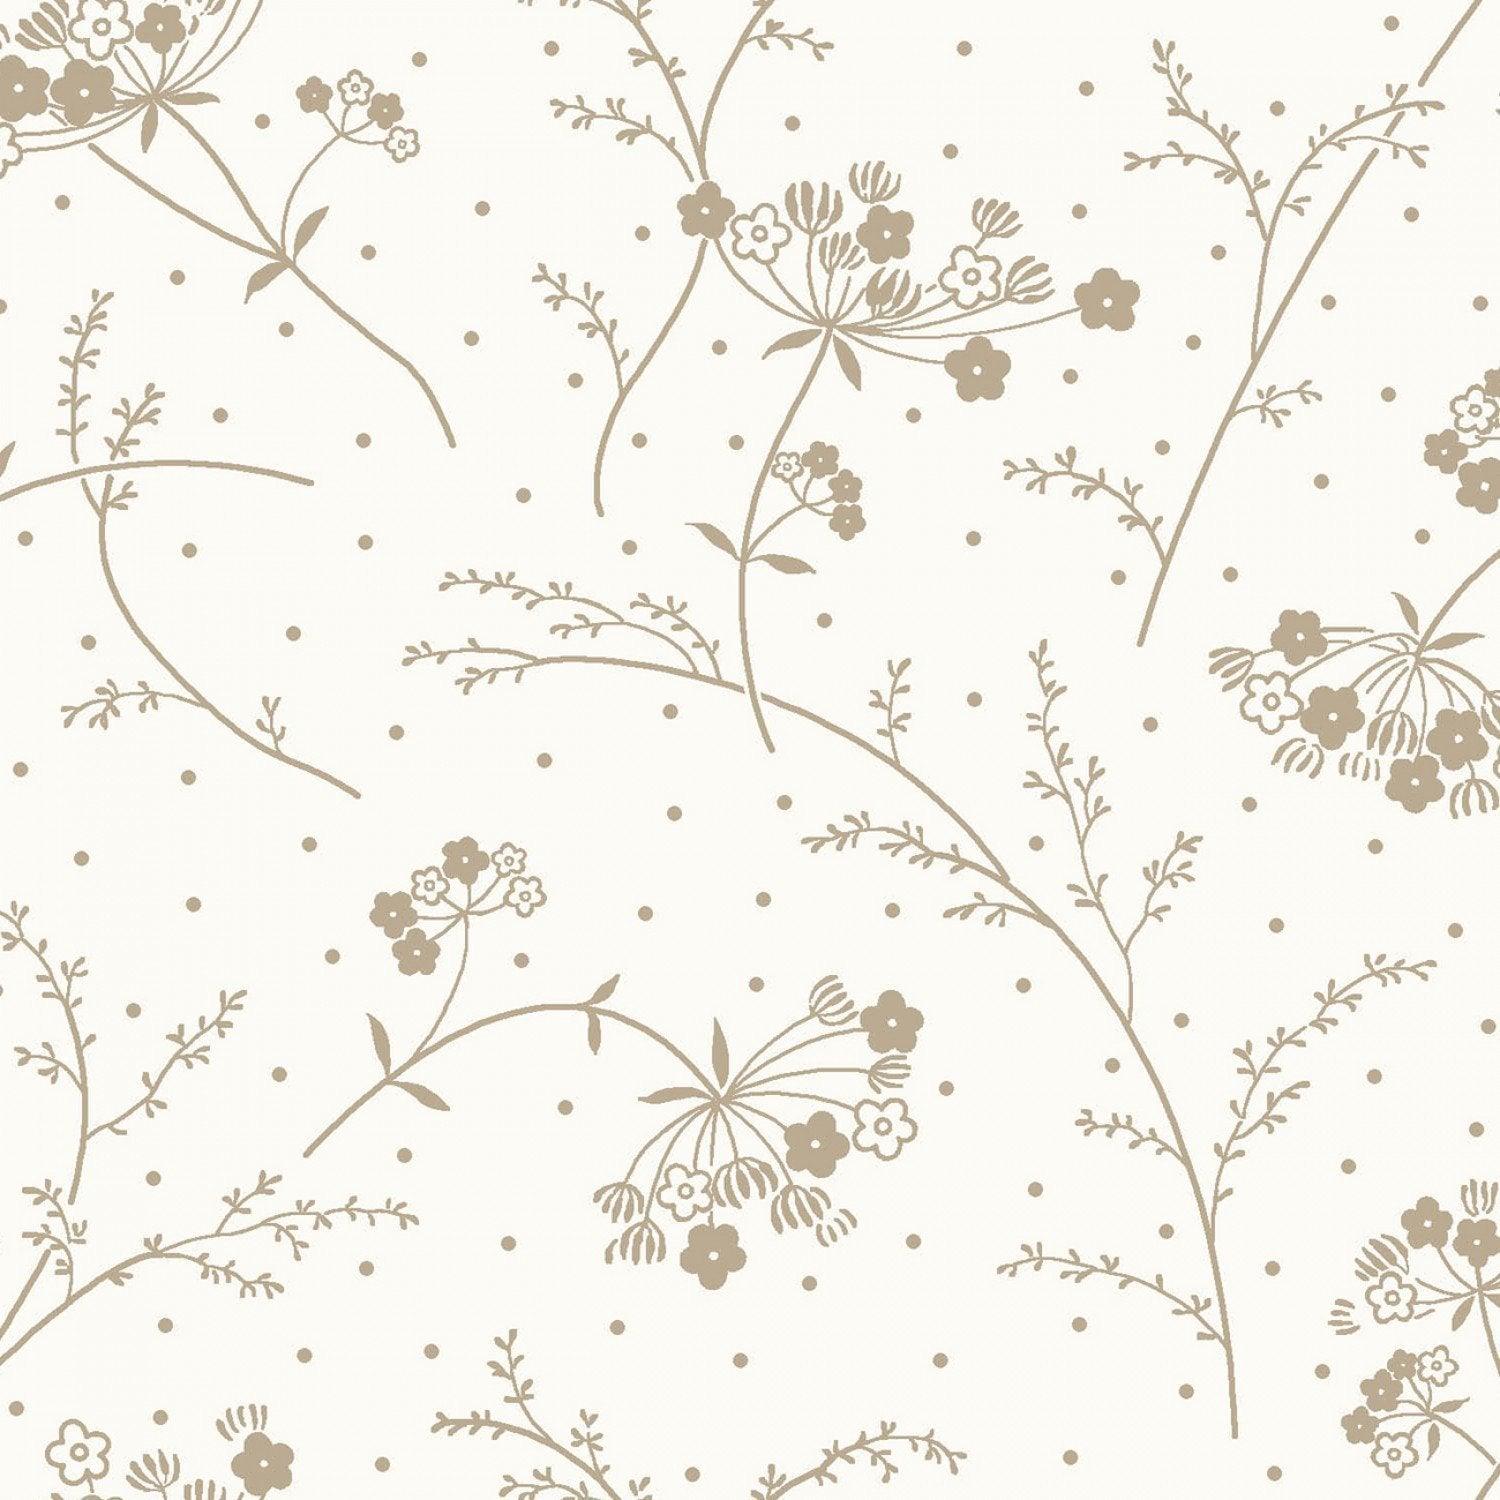 Queen Anne's Lace - White/Taupe - 44" Wide - Kimberbell Basics - Kawartha Quilting and Sewing LTD.